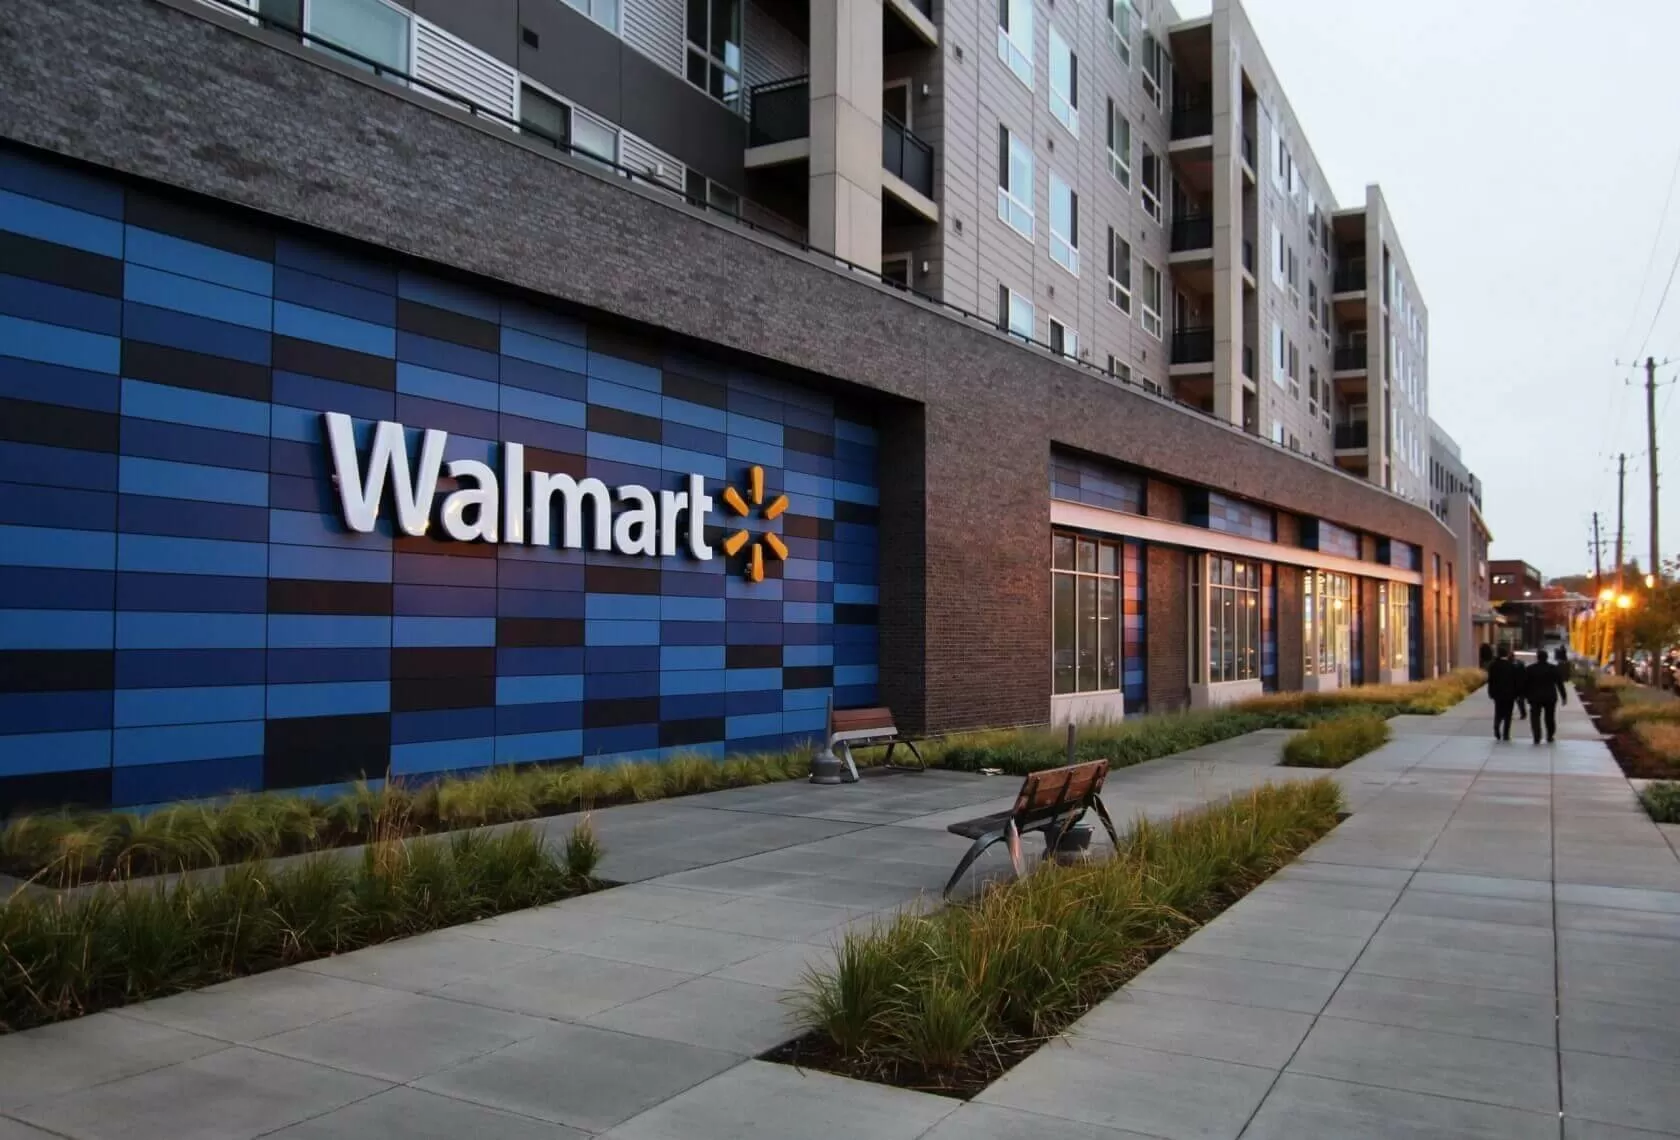 Walmart experiments with cashierless checkout at Arkansas store location